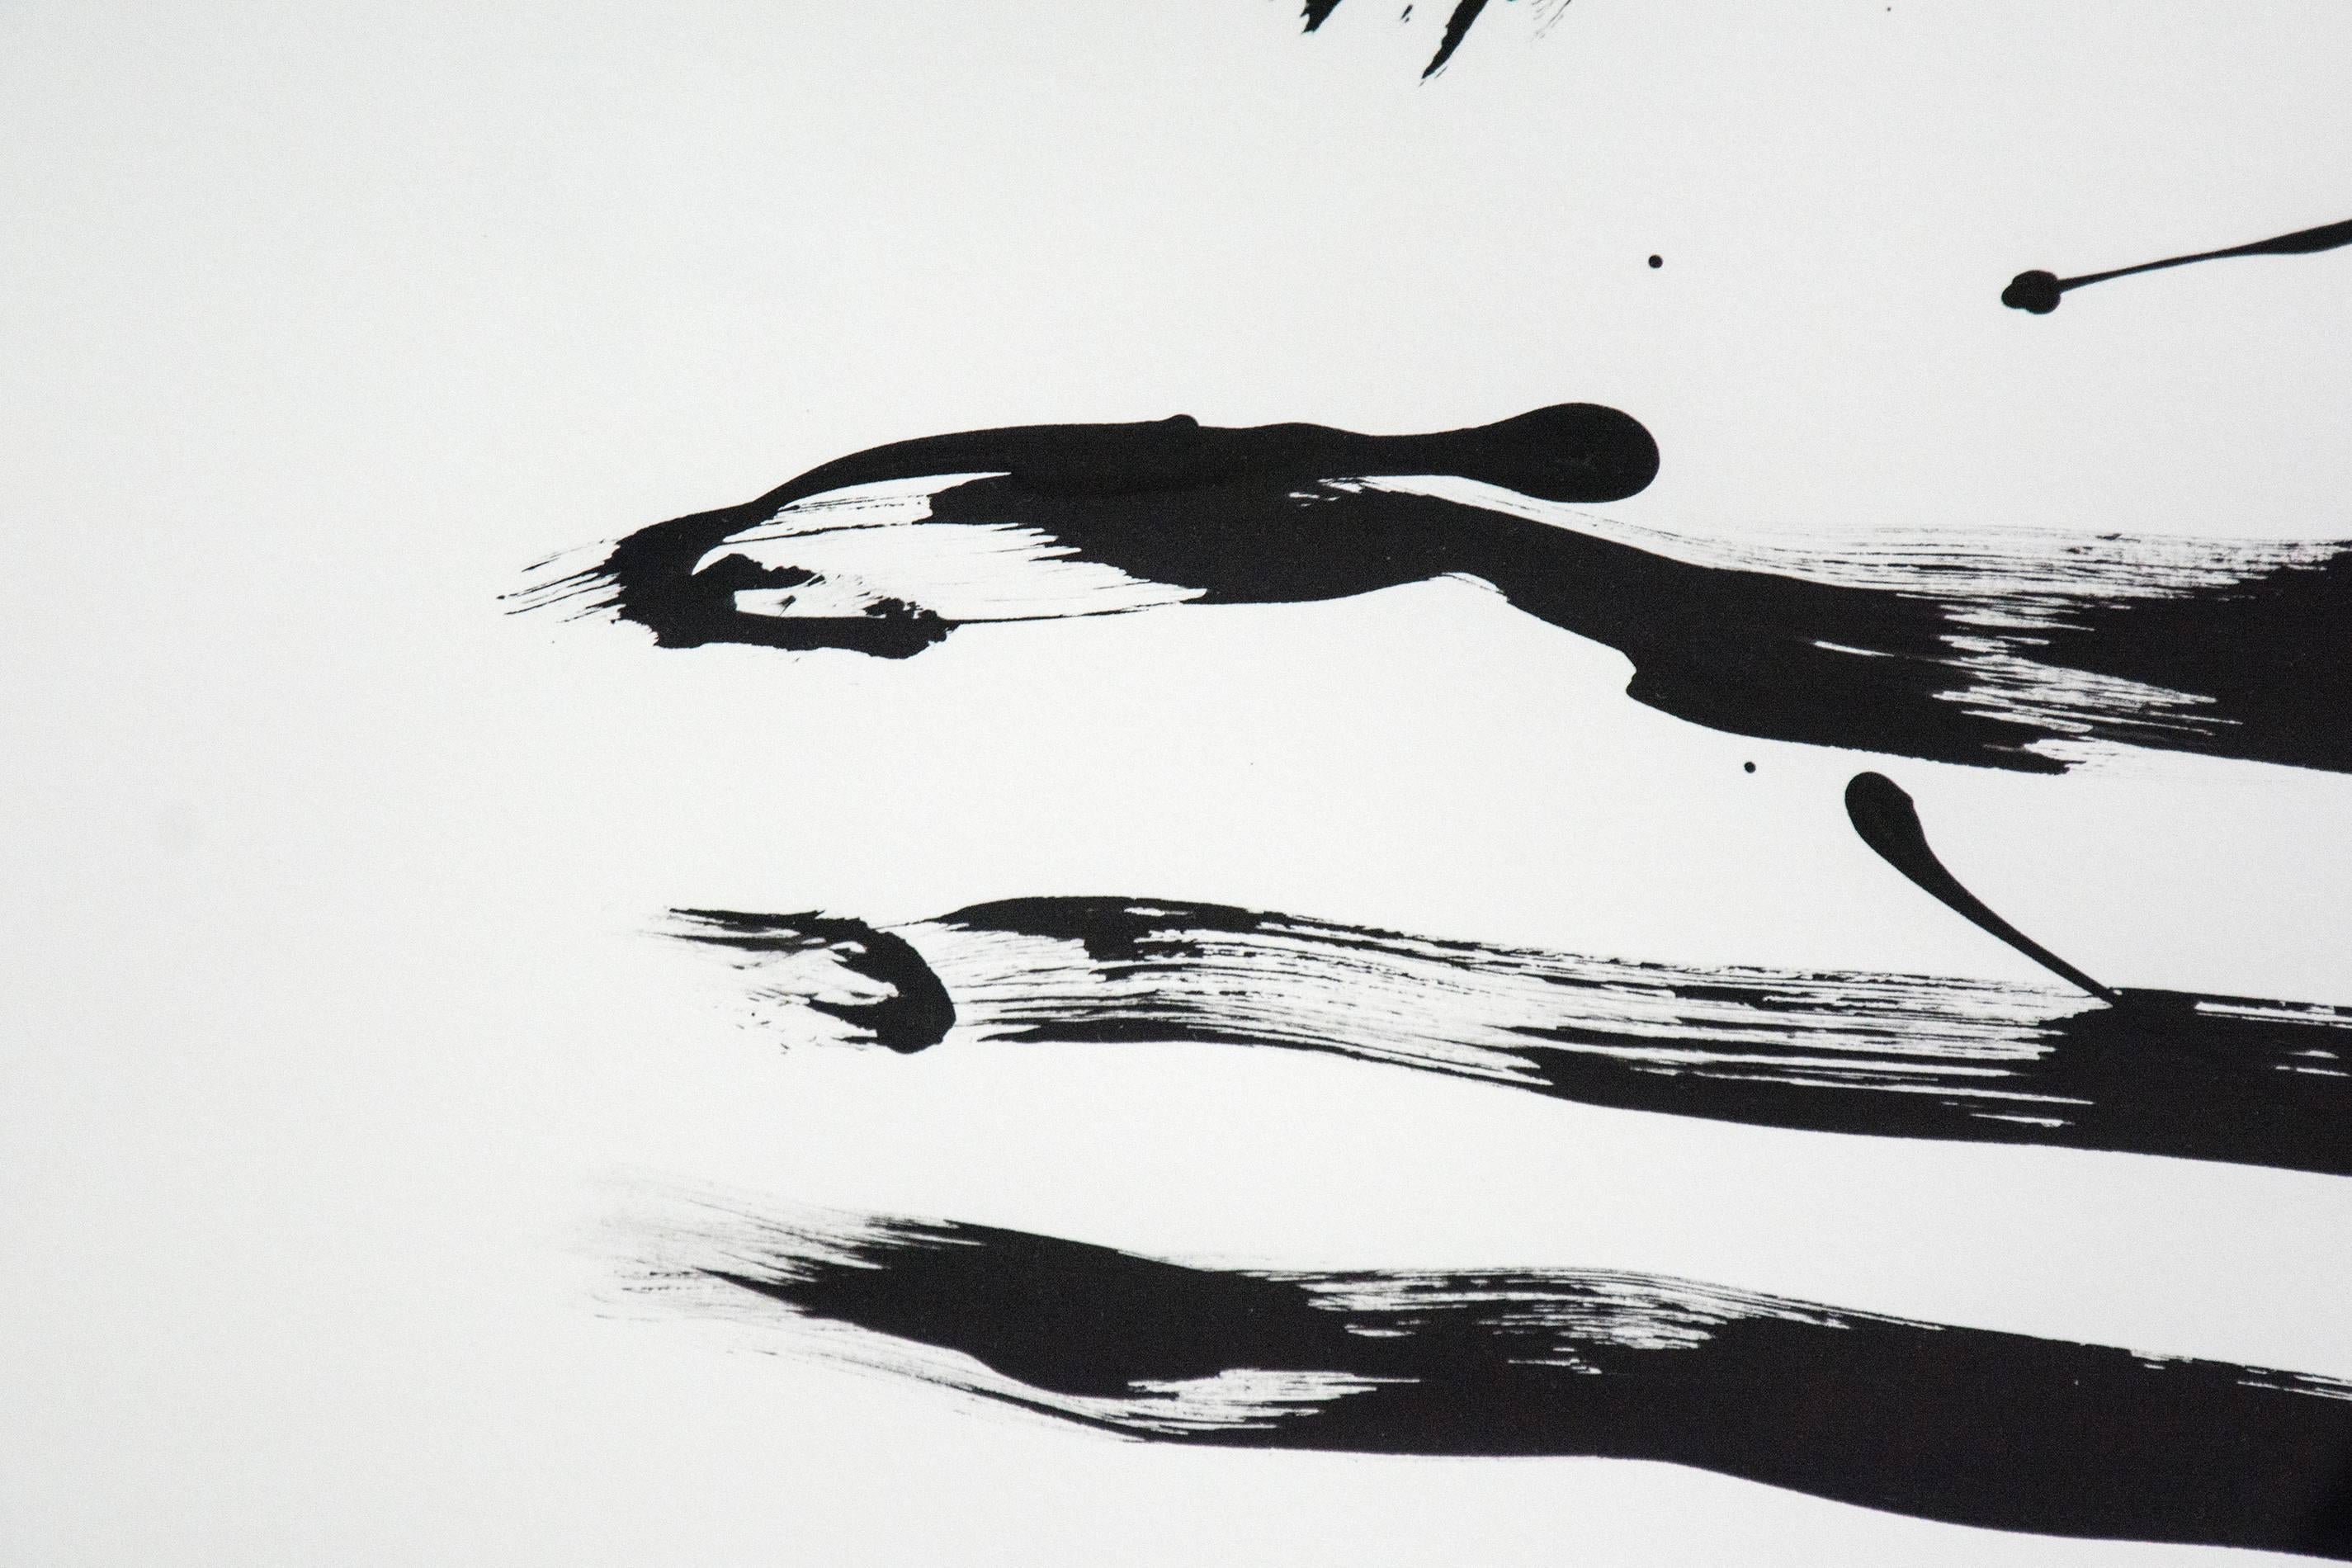 Three black brushstrokes representing ground and rapid dashes of black, drizzled and brushed form the profile of a dog, his leash flying upwards in this work on paper. Off leash parks in Toronto where dogs run free, are places of joy for pets and